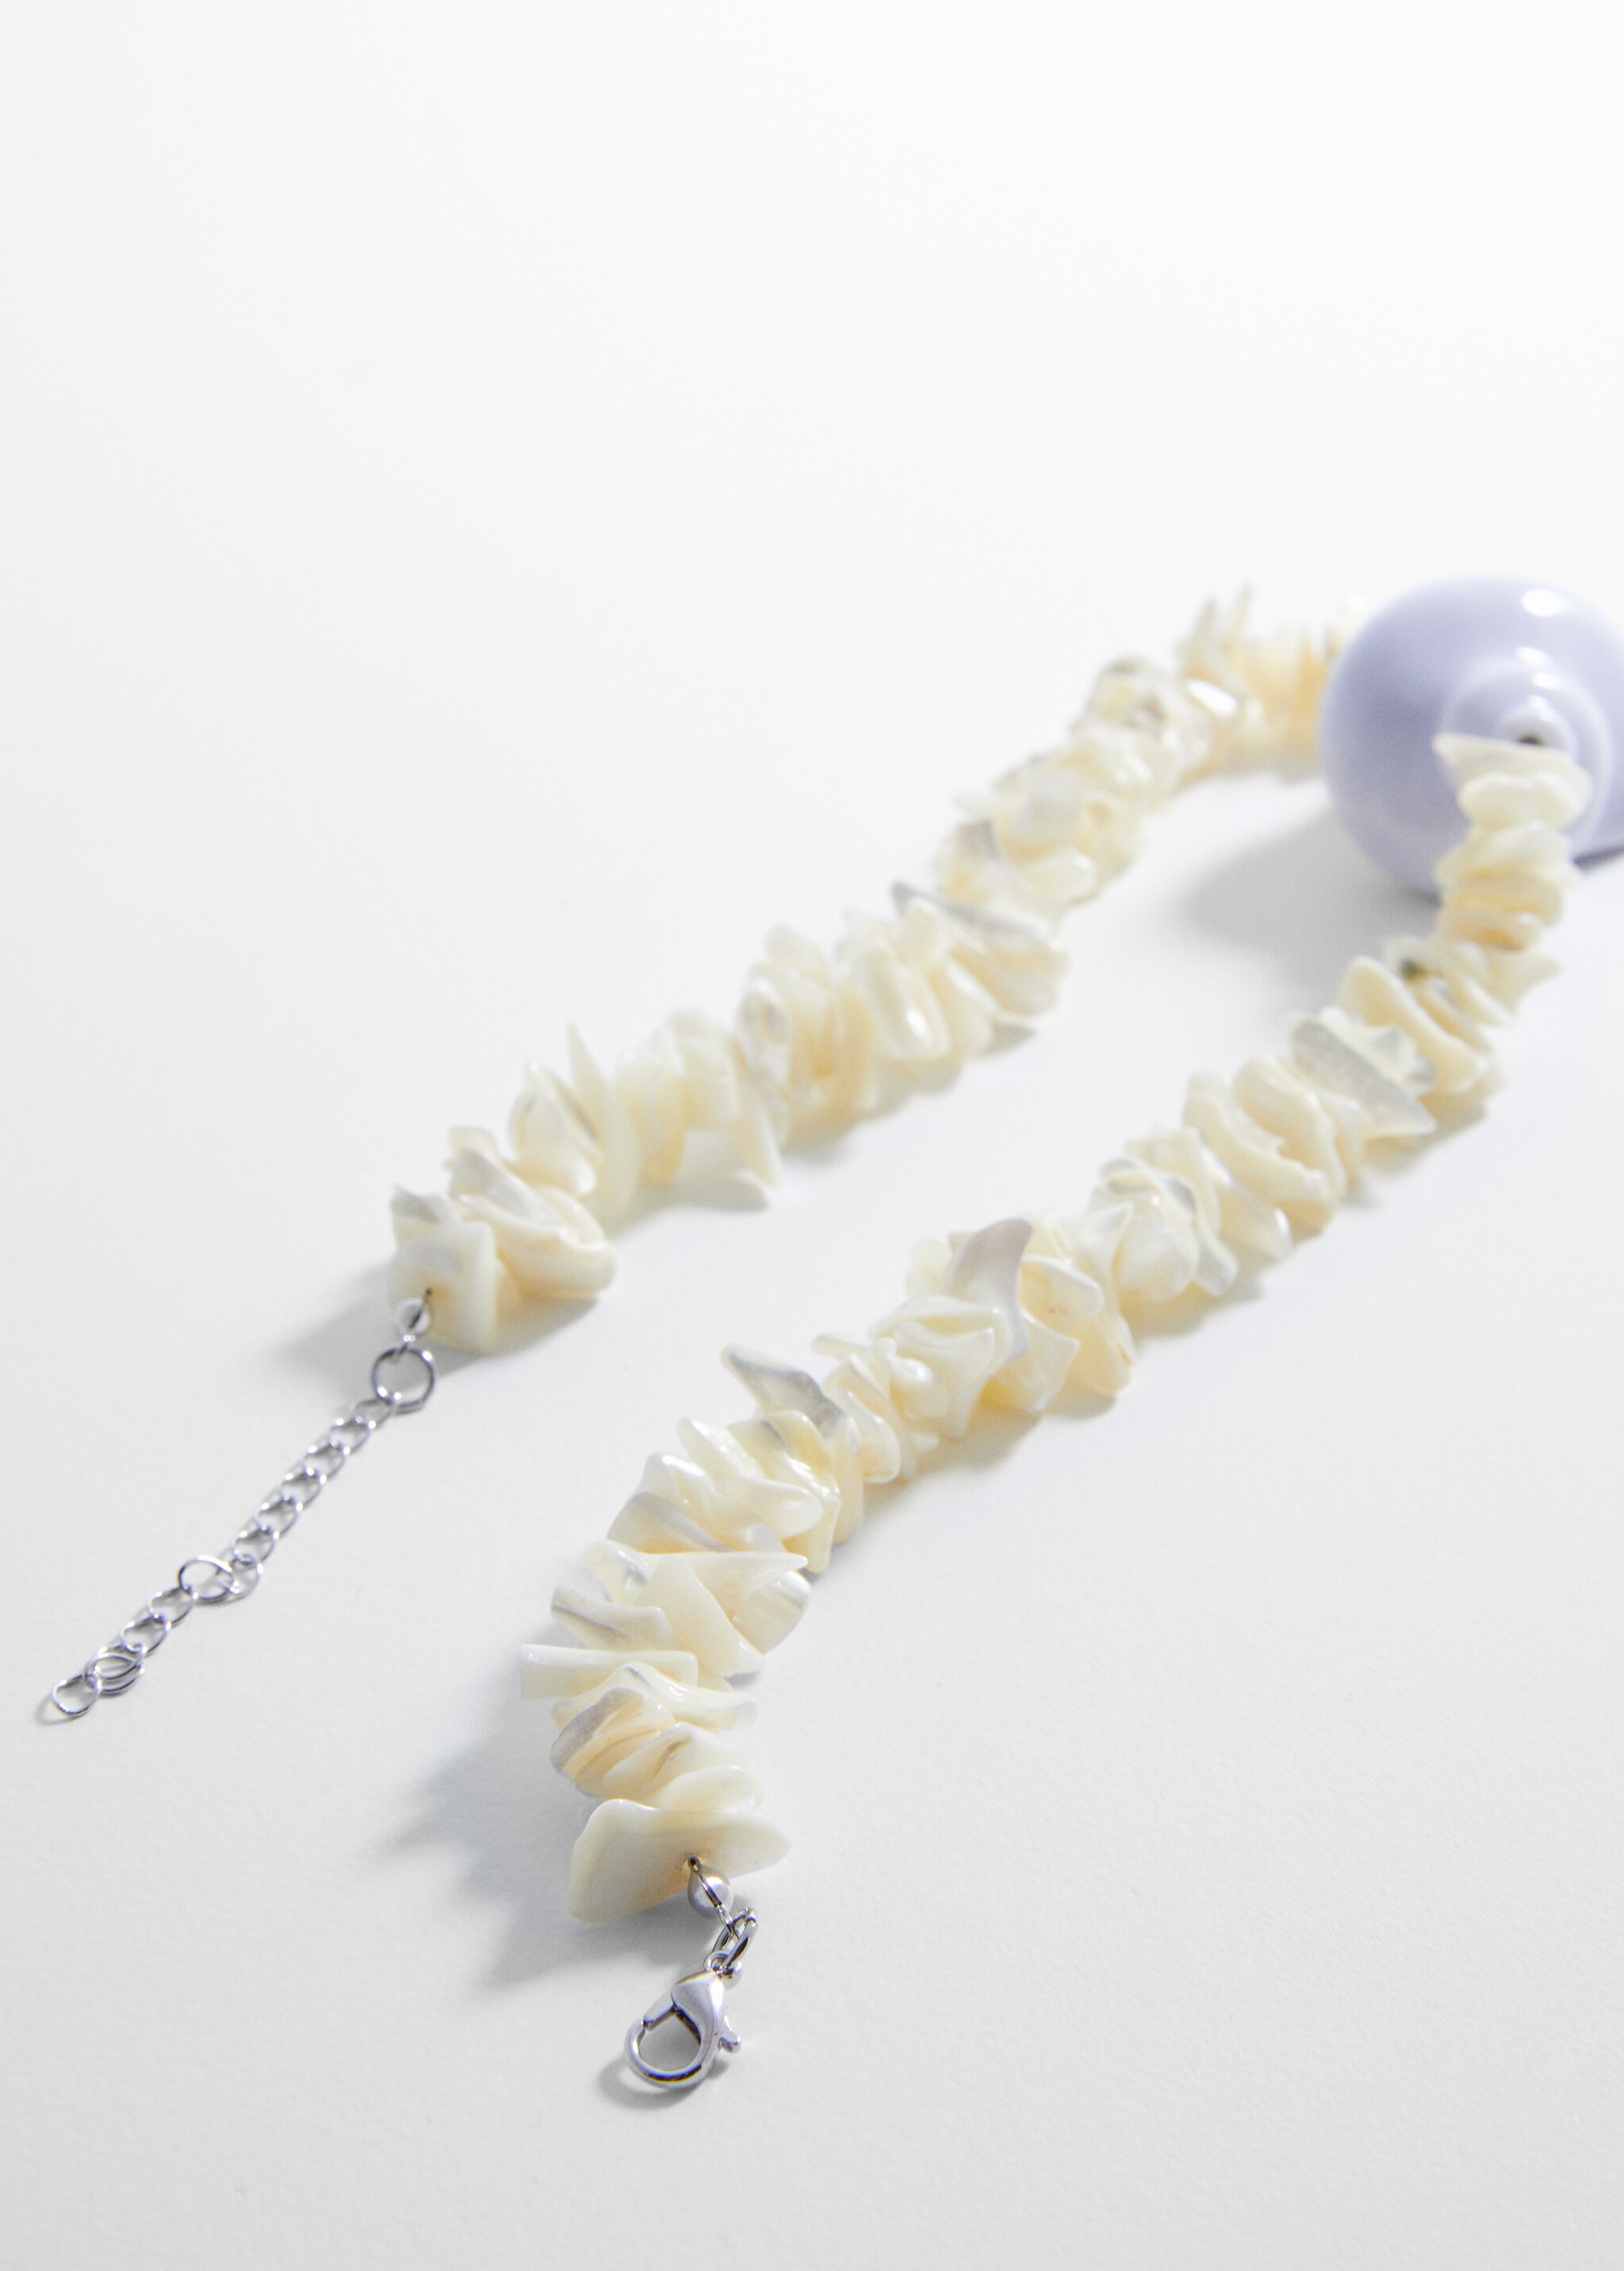 Shell necklace with mother-of-pearl beads - Details of the article 1